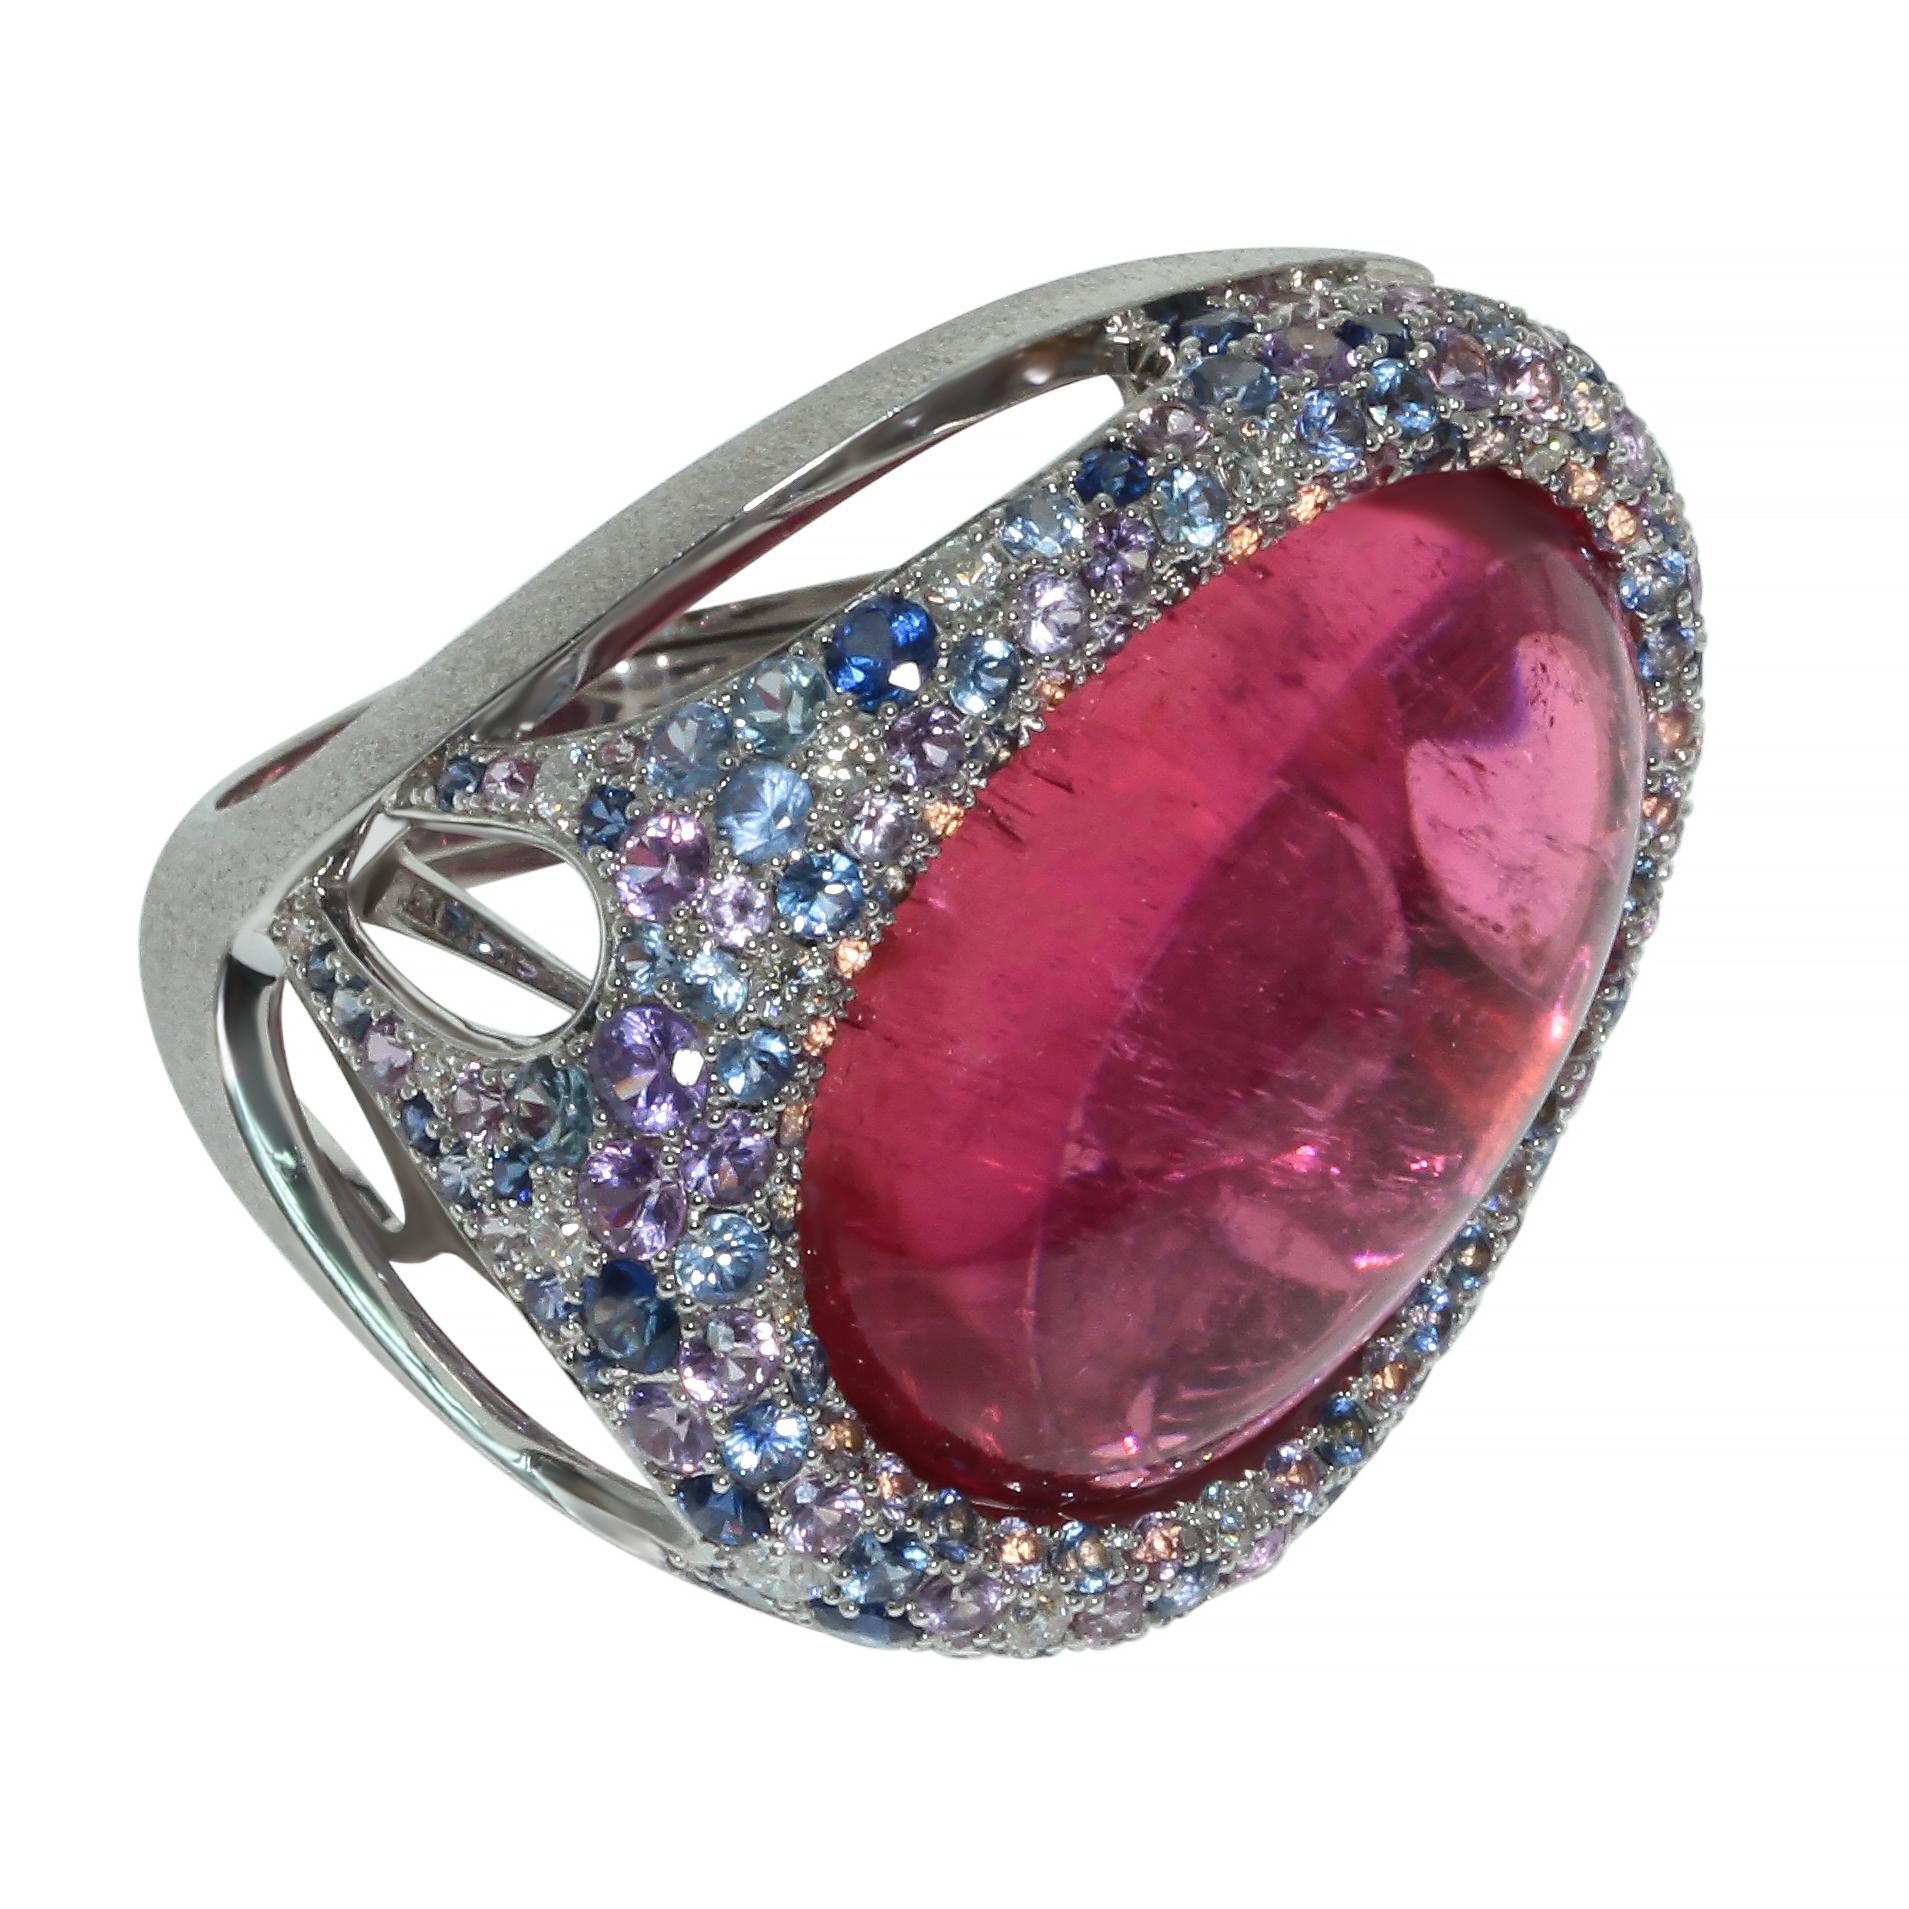 Rubellite 22.86 Carat Diamonds Sapphires 18 Karat White Gold Ring

Combination of Purple and Blue sapphires and Diamonds perfectly highlight the rich pink color of 22.86 Carat Oval Cabochon cut Rubellite. As you can see the Ring is made in an